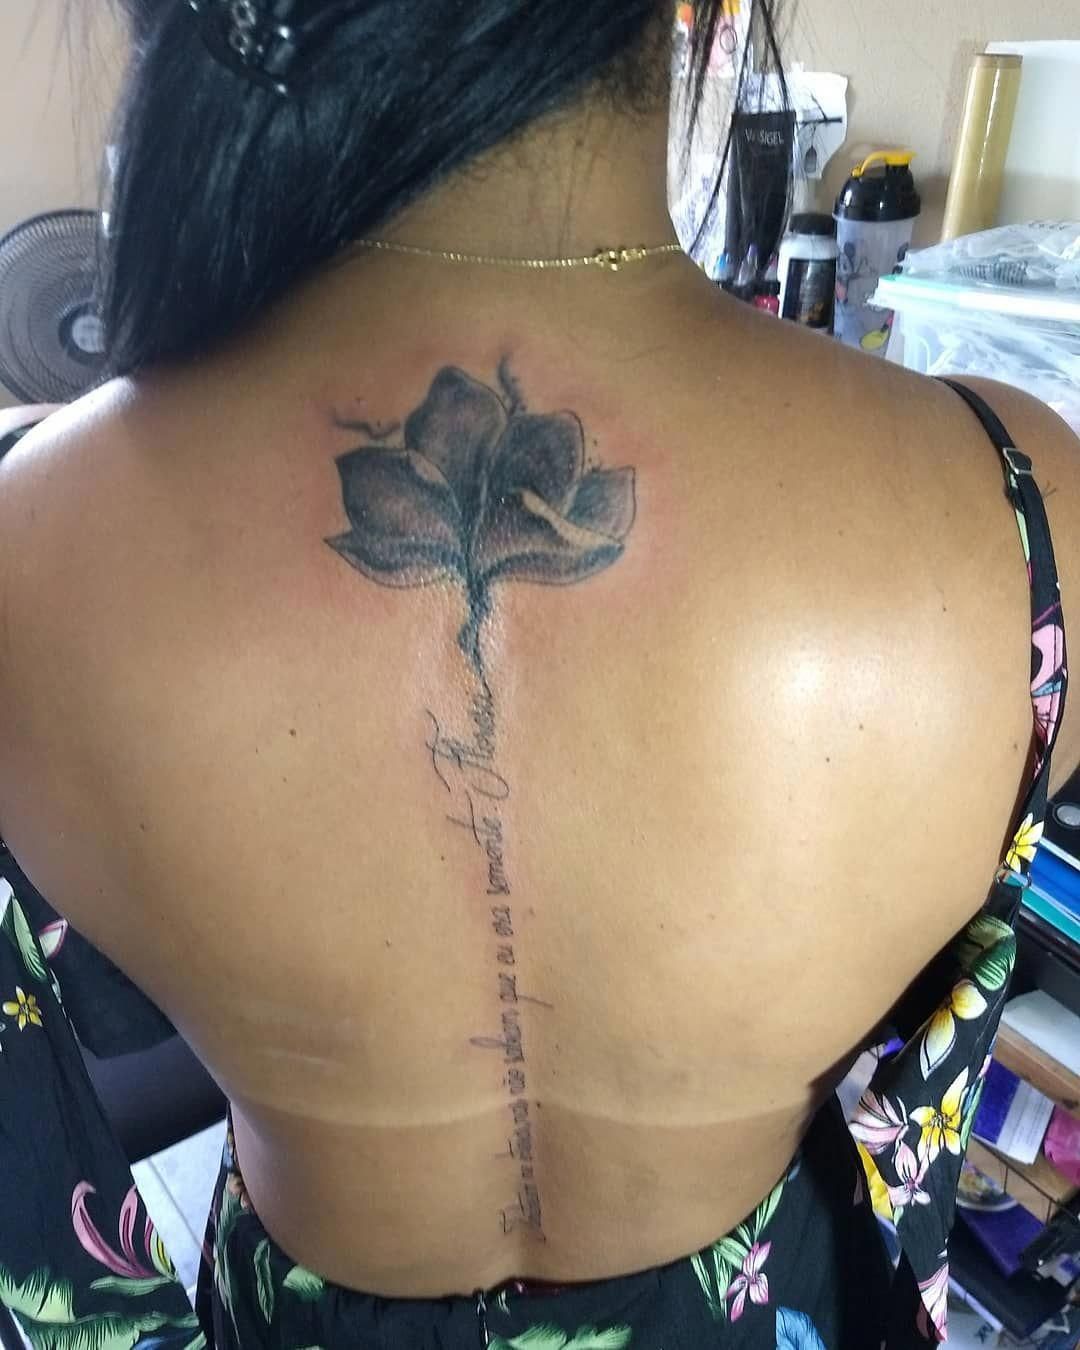 Best Place For A Tattoo On A Woman (34)